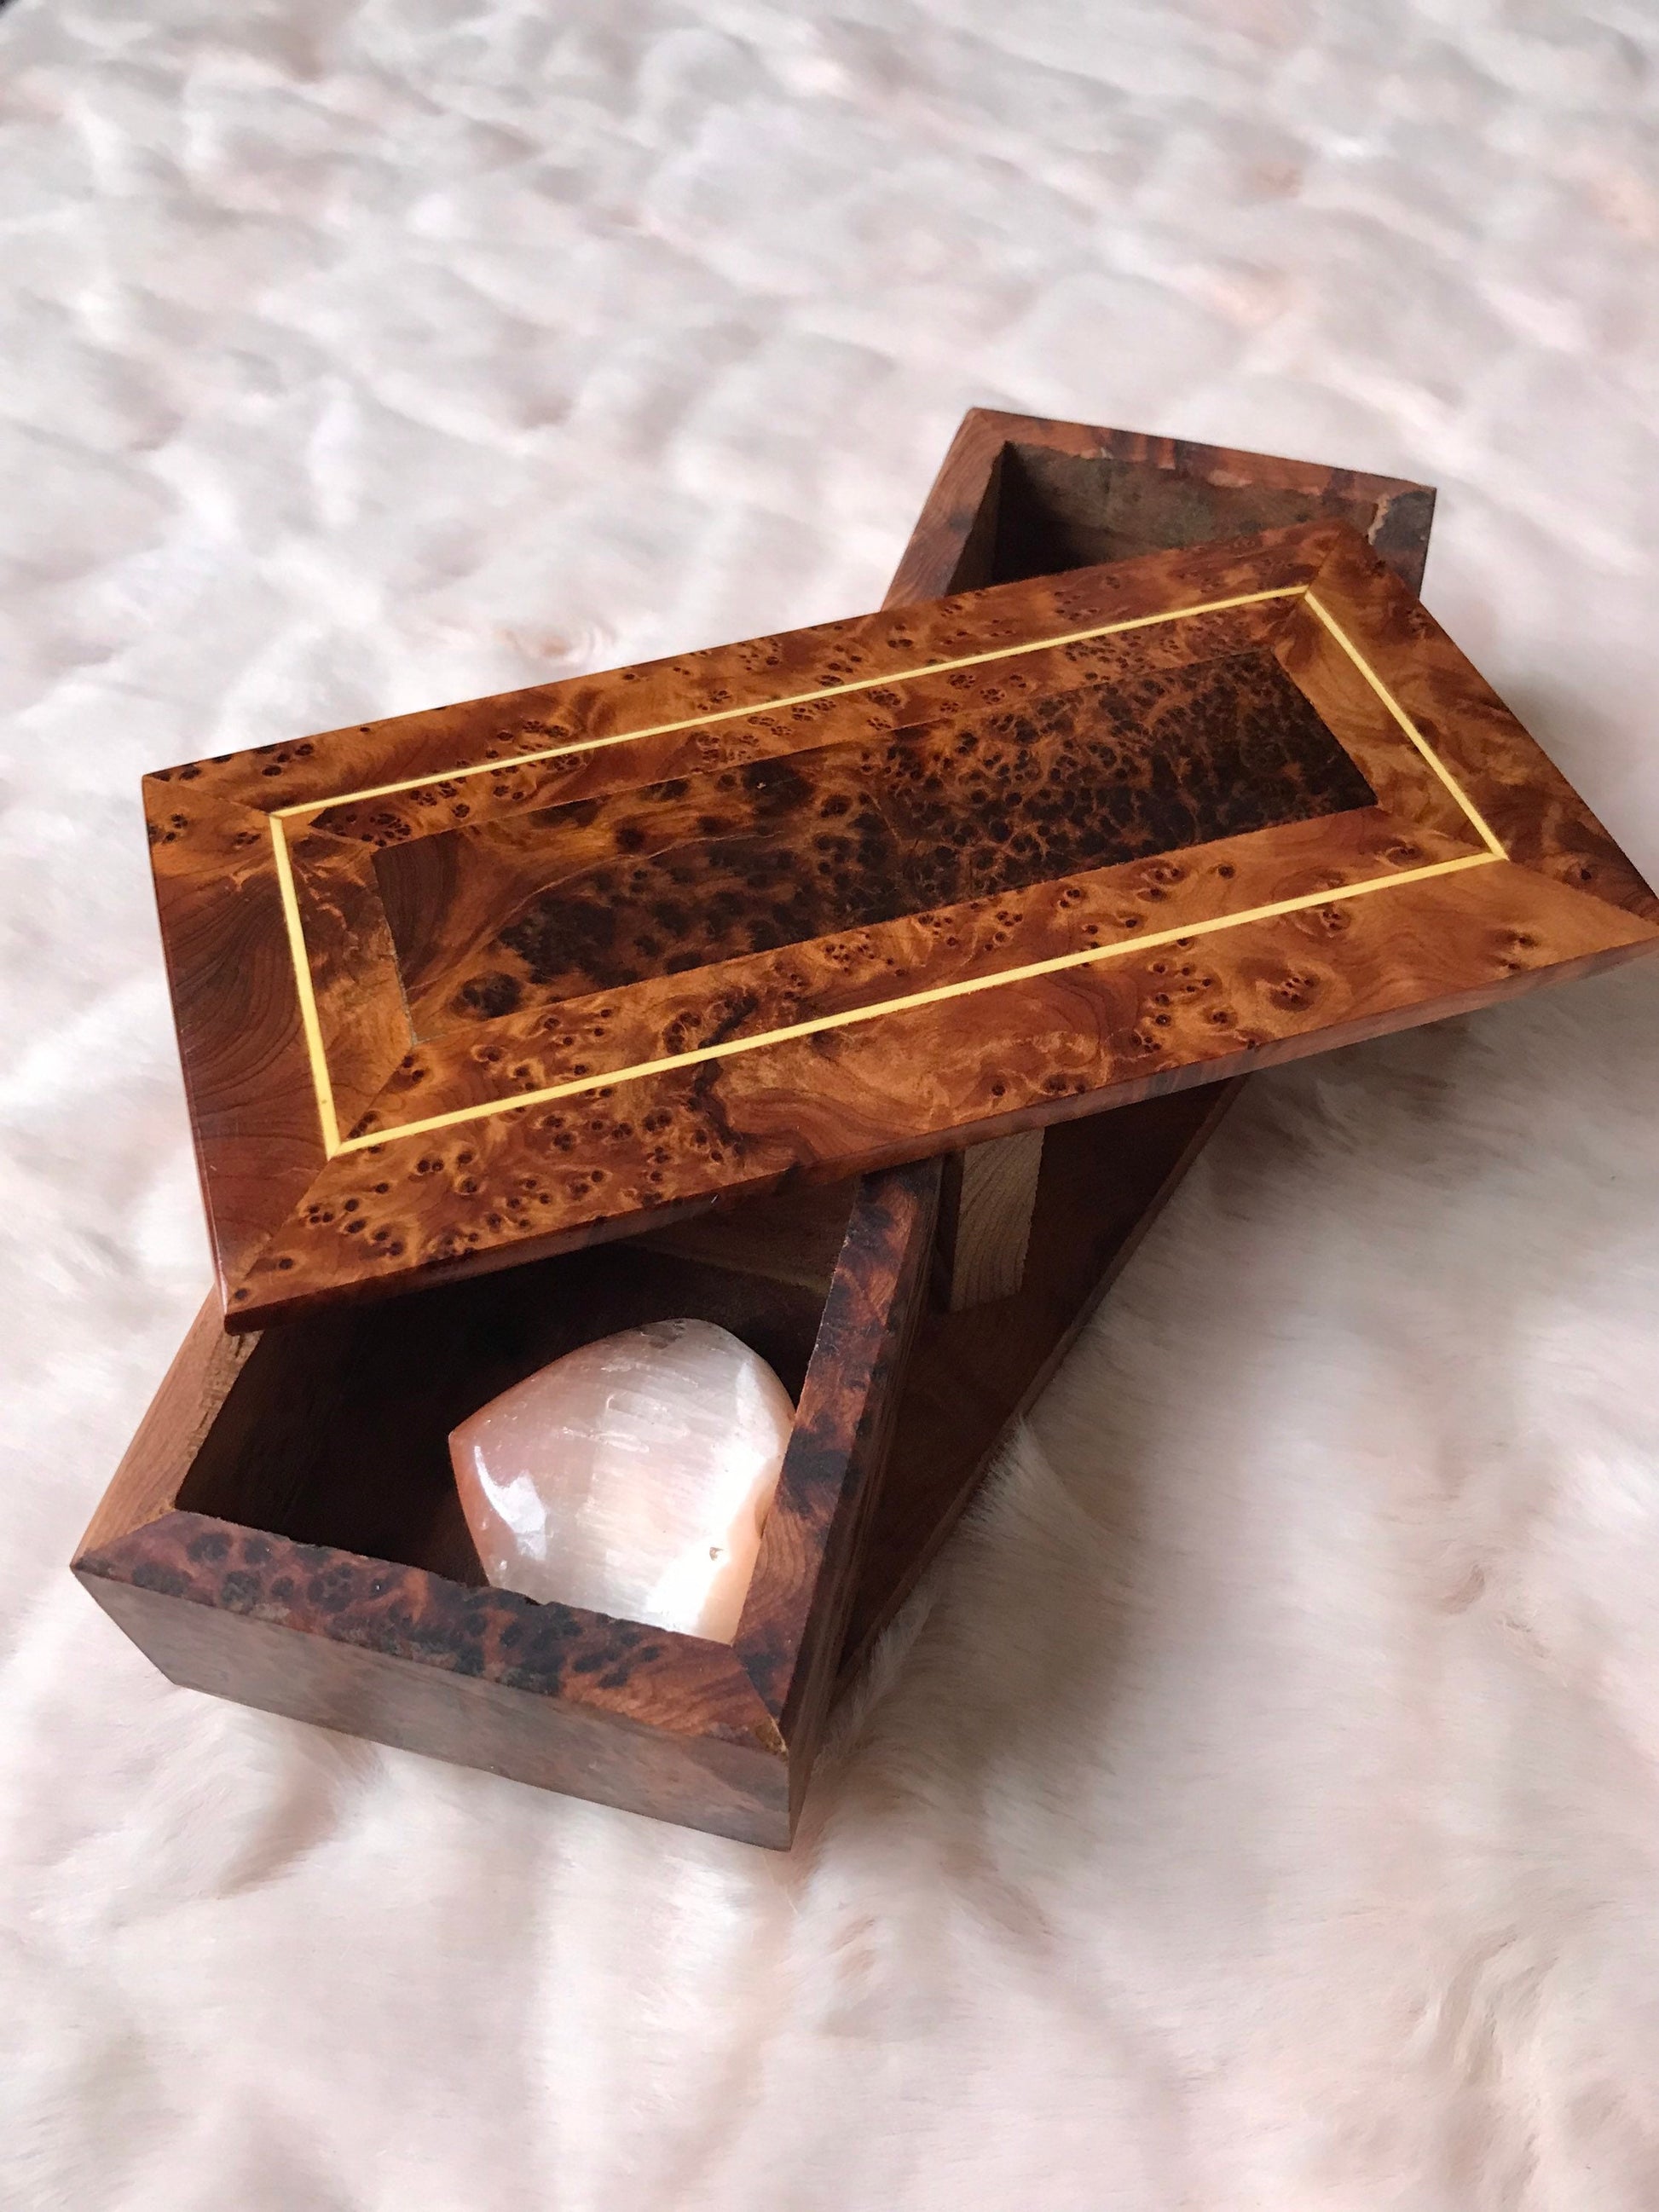 Moroccan Thuya wood jewelry Box,two jewellery zones,magic burl wooden box,Jewelry organizer,gift for him or her,lemon wood engraving